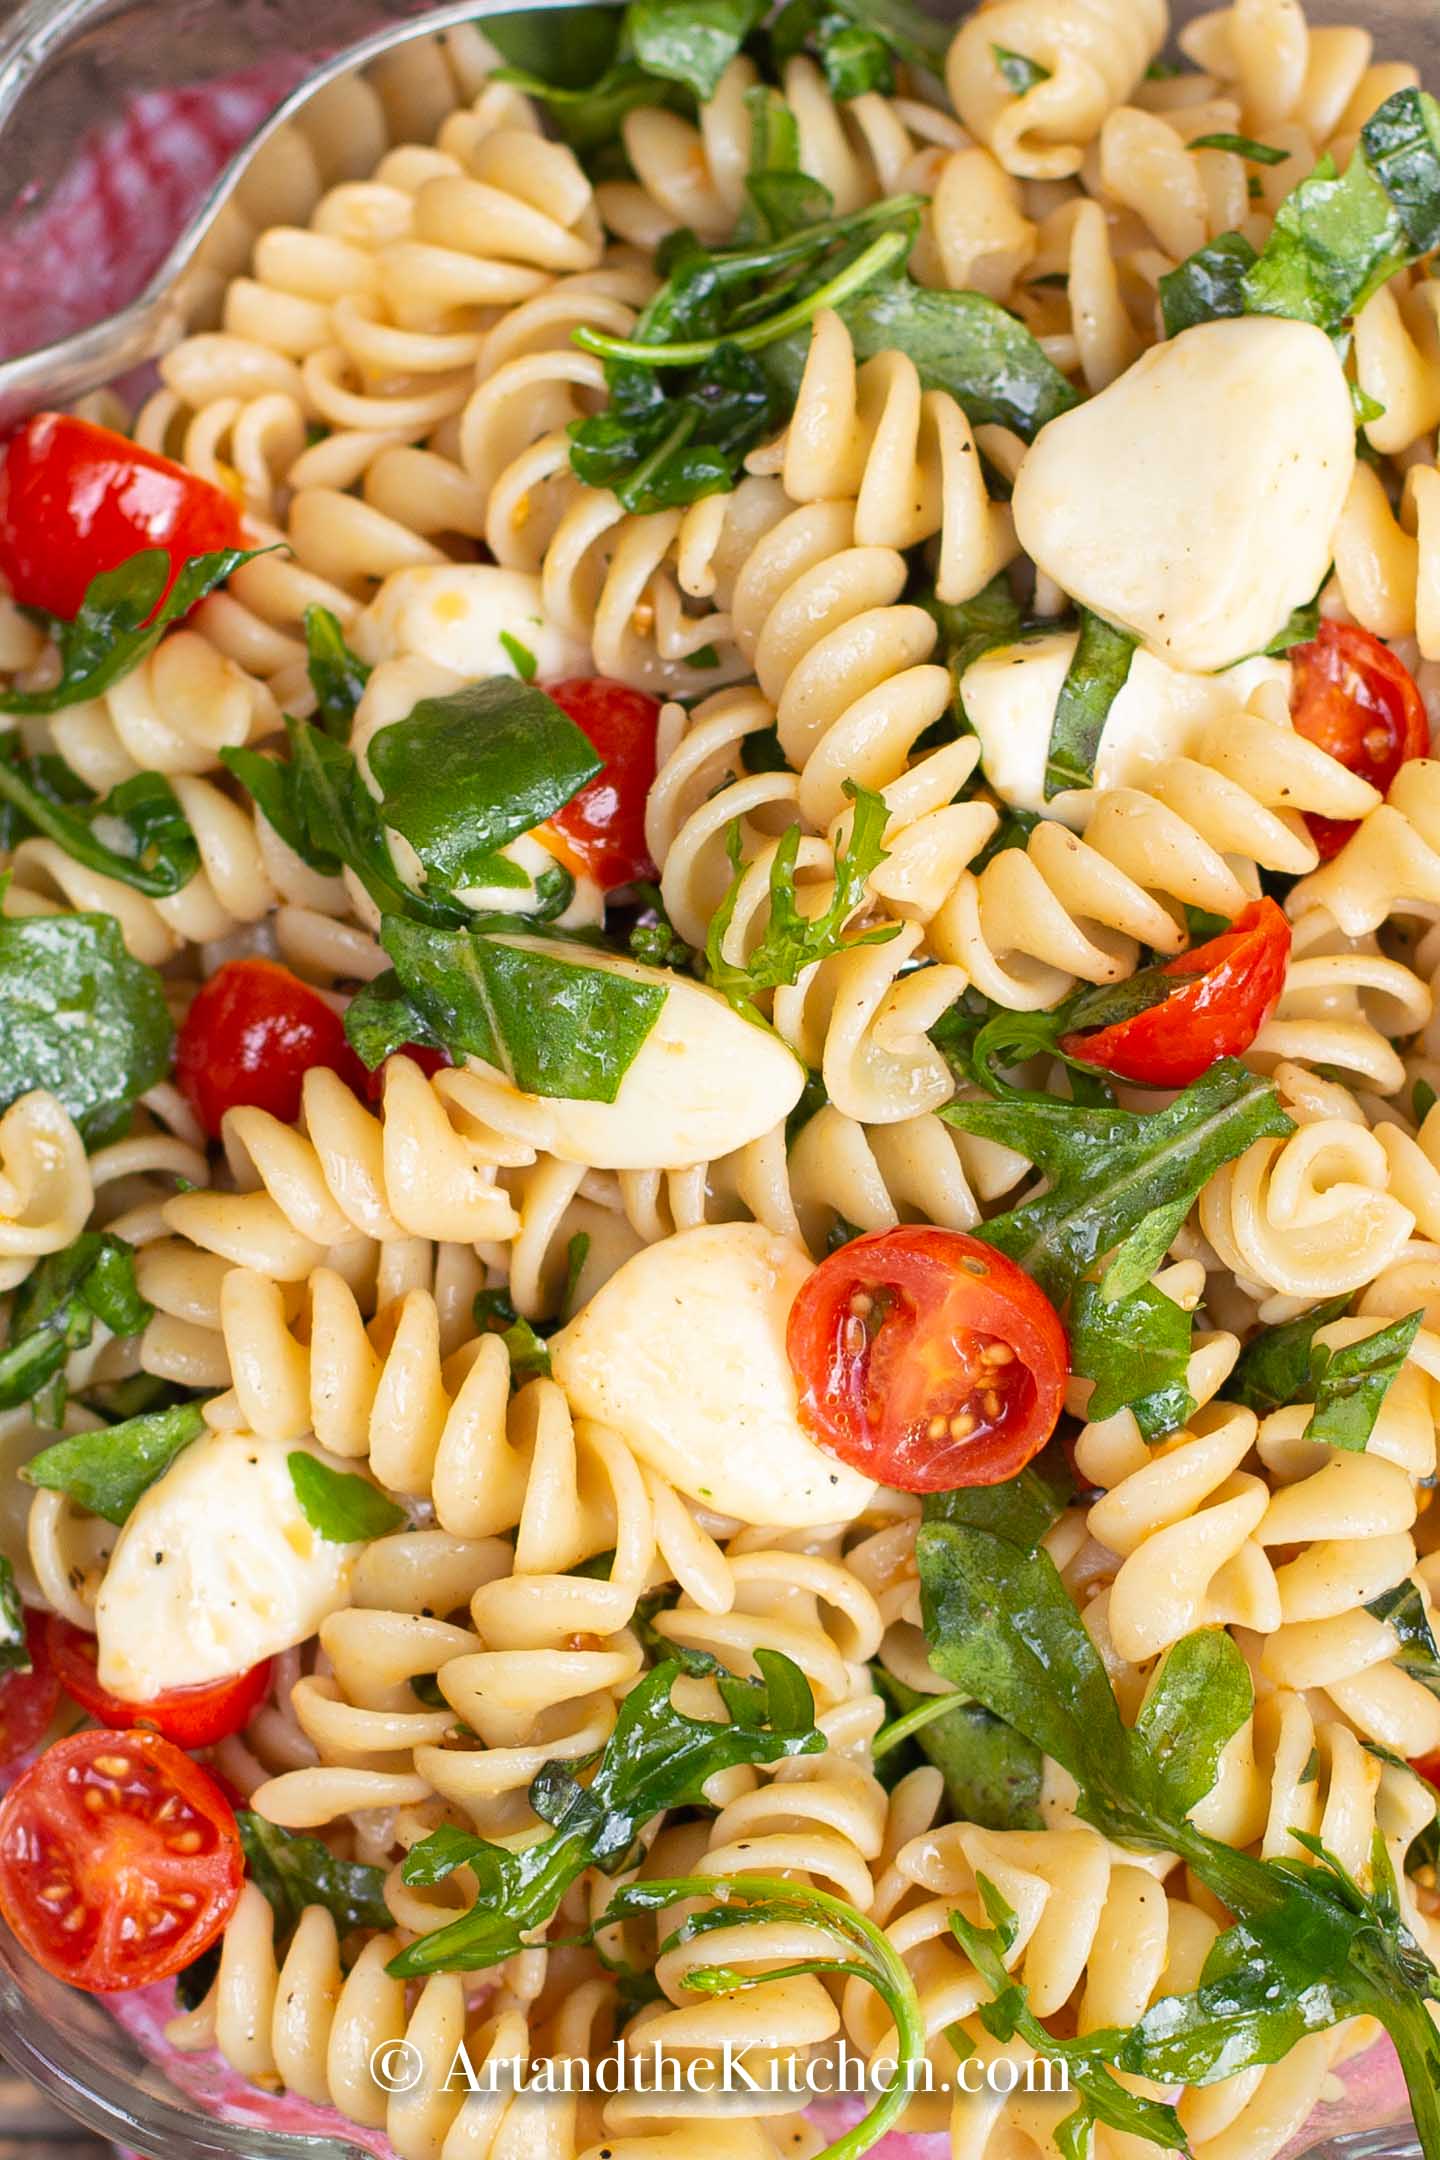 Rotini pasta tossed together with bocconcini, garden fresh cherry tomatoes, arugula, and fresh basil.